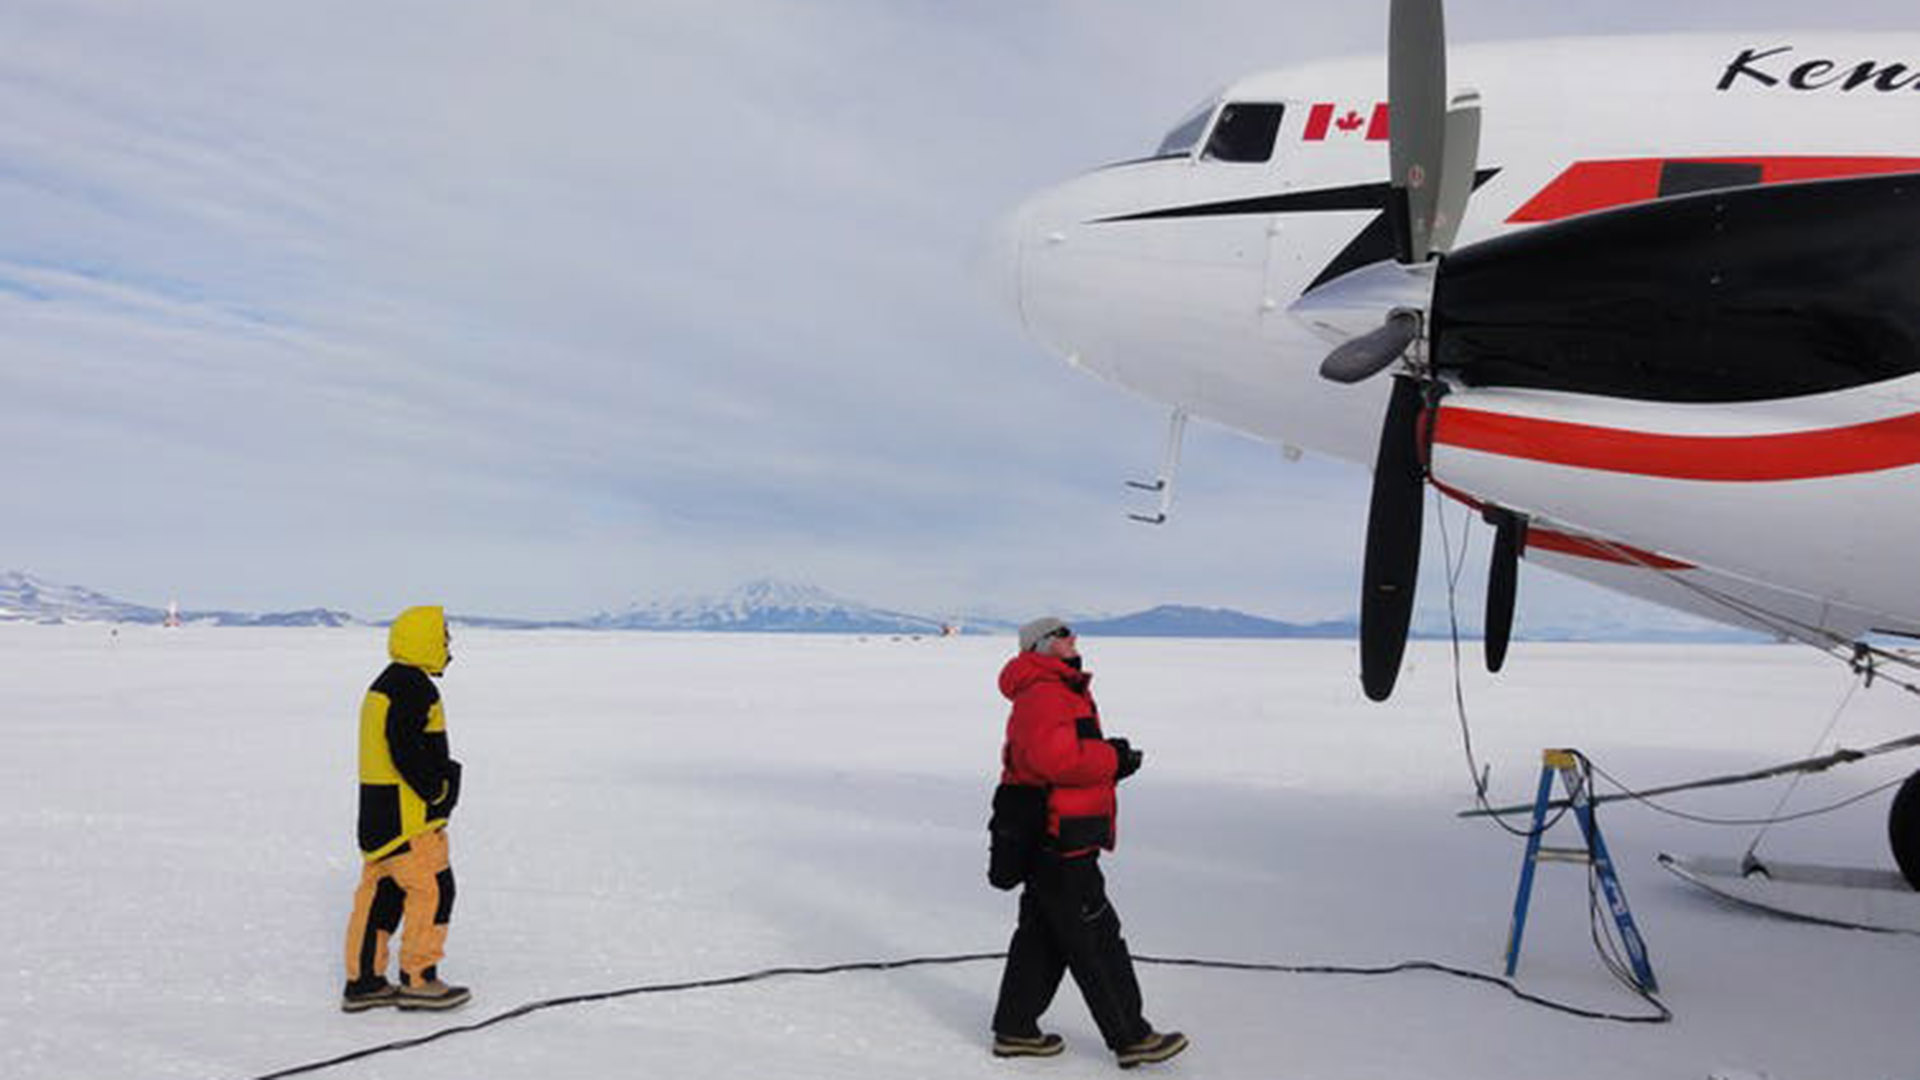 Researchers approach a plan on an airstrip in Antarctica. Photo: Dana Bergstrom